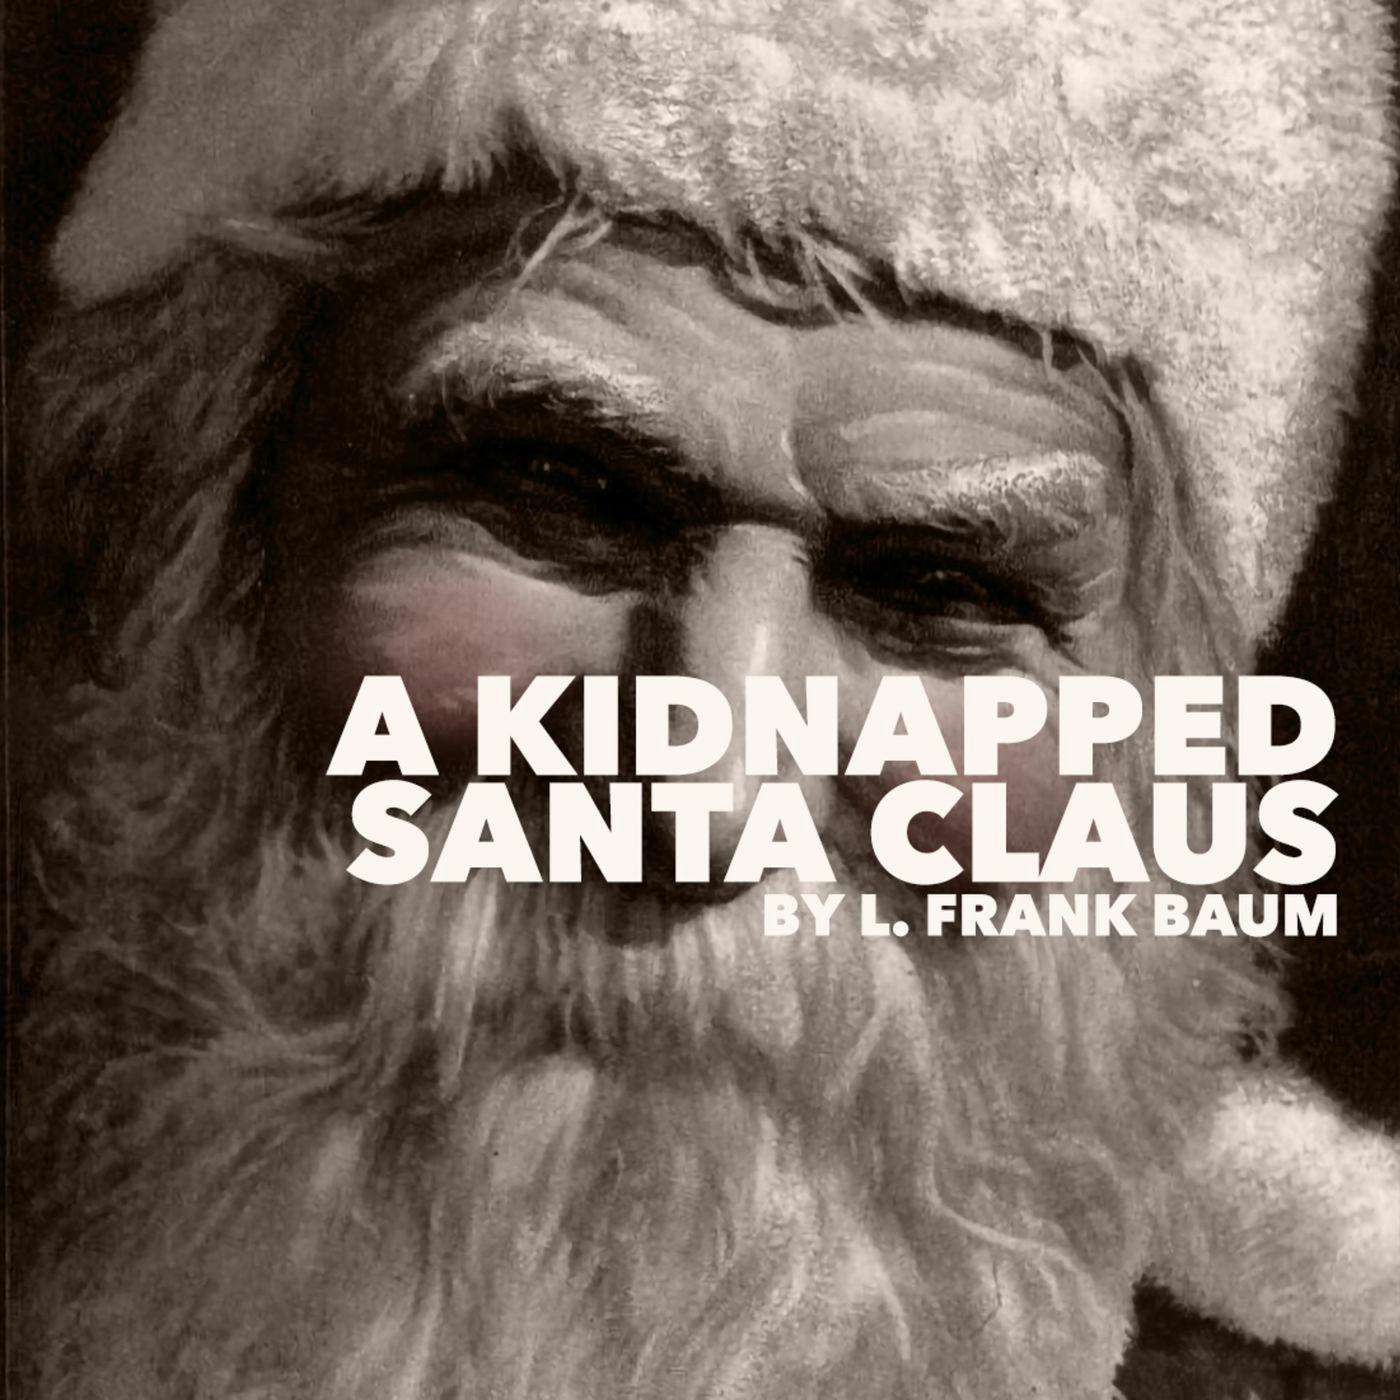 A Kidnapped Santa Claus by L. Frank Baum - A Classic Christmas Story